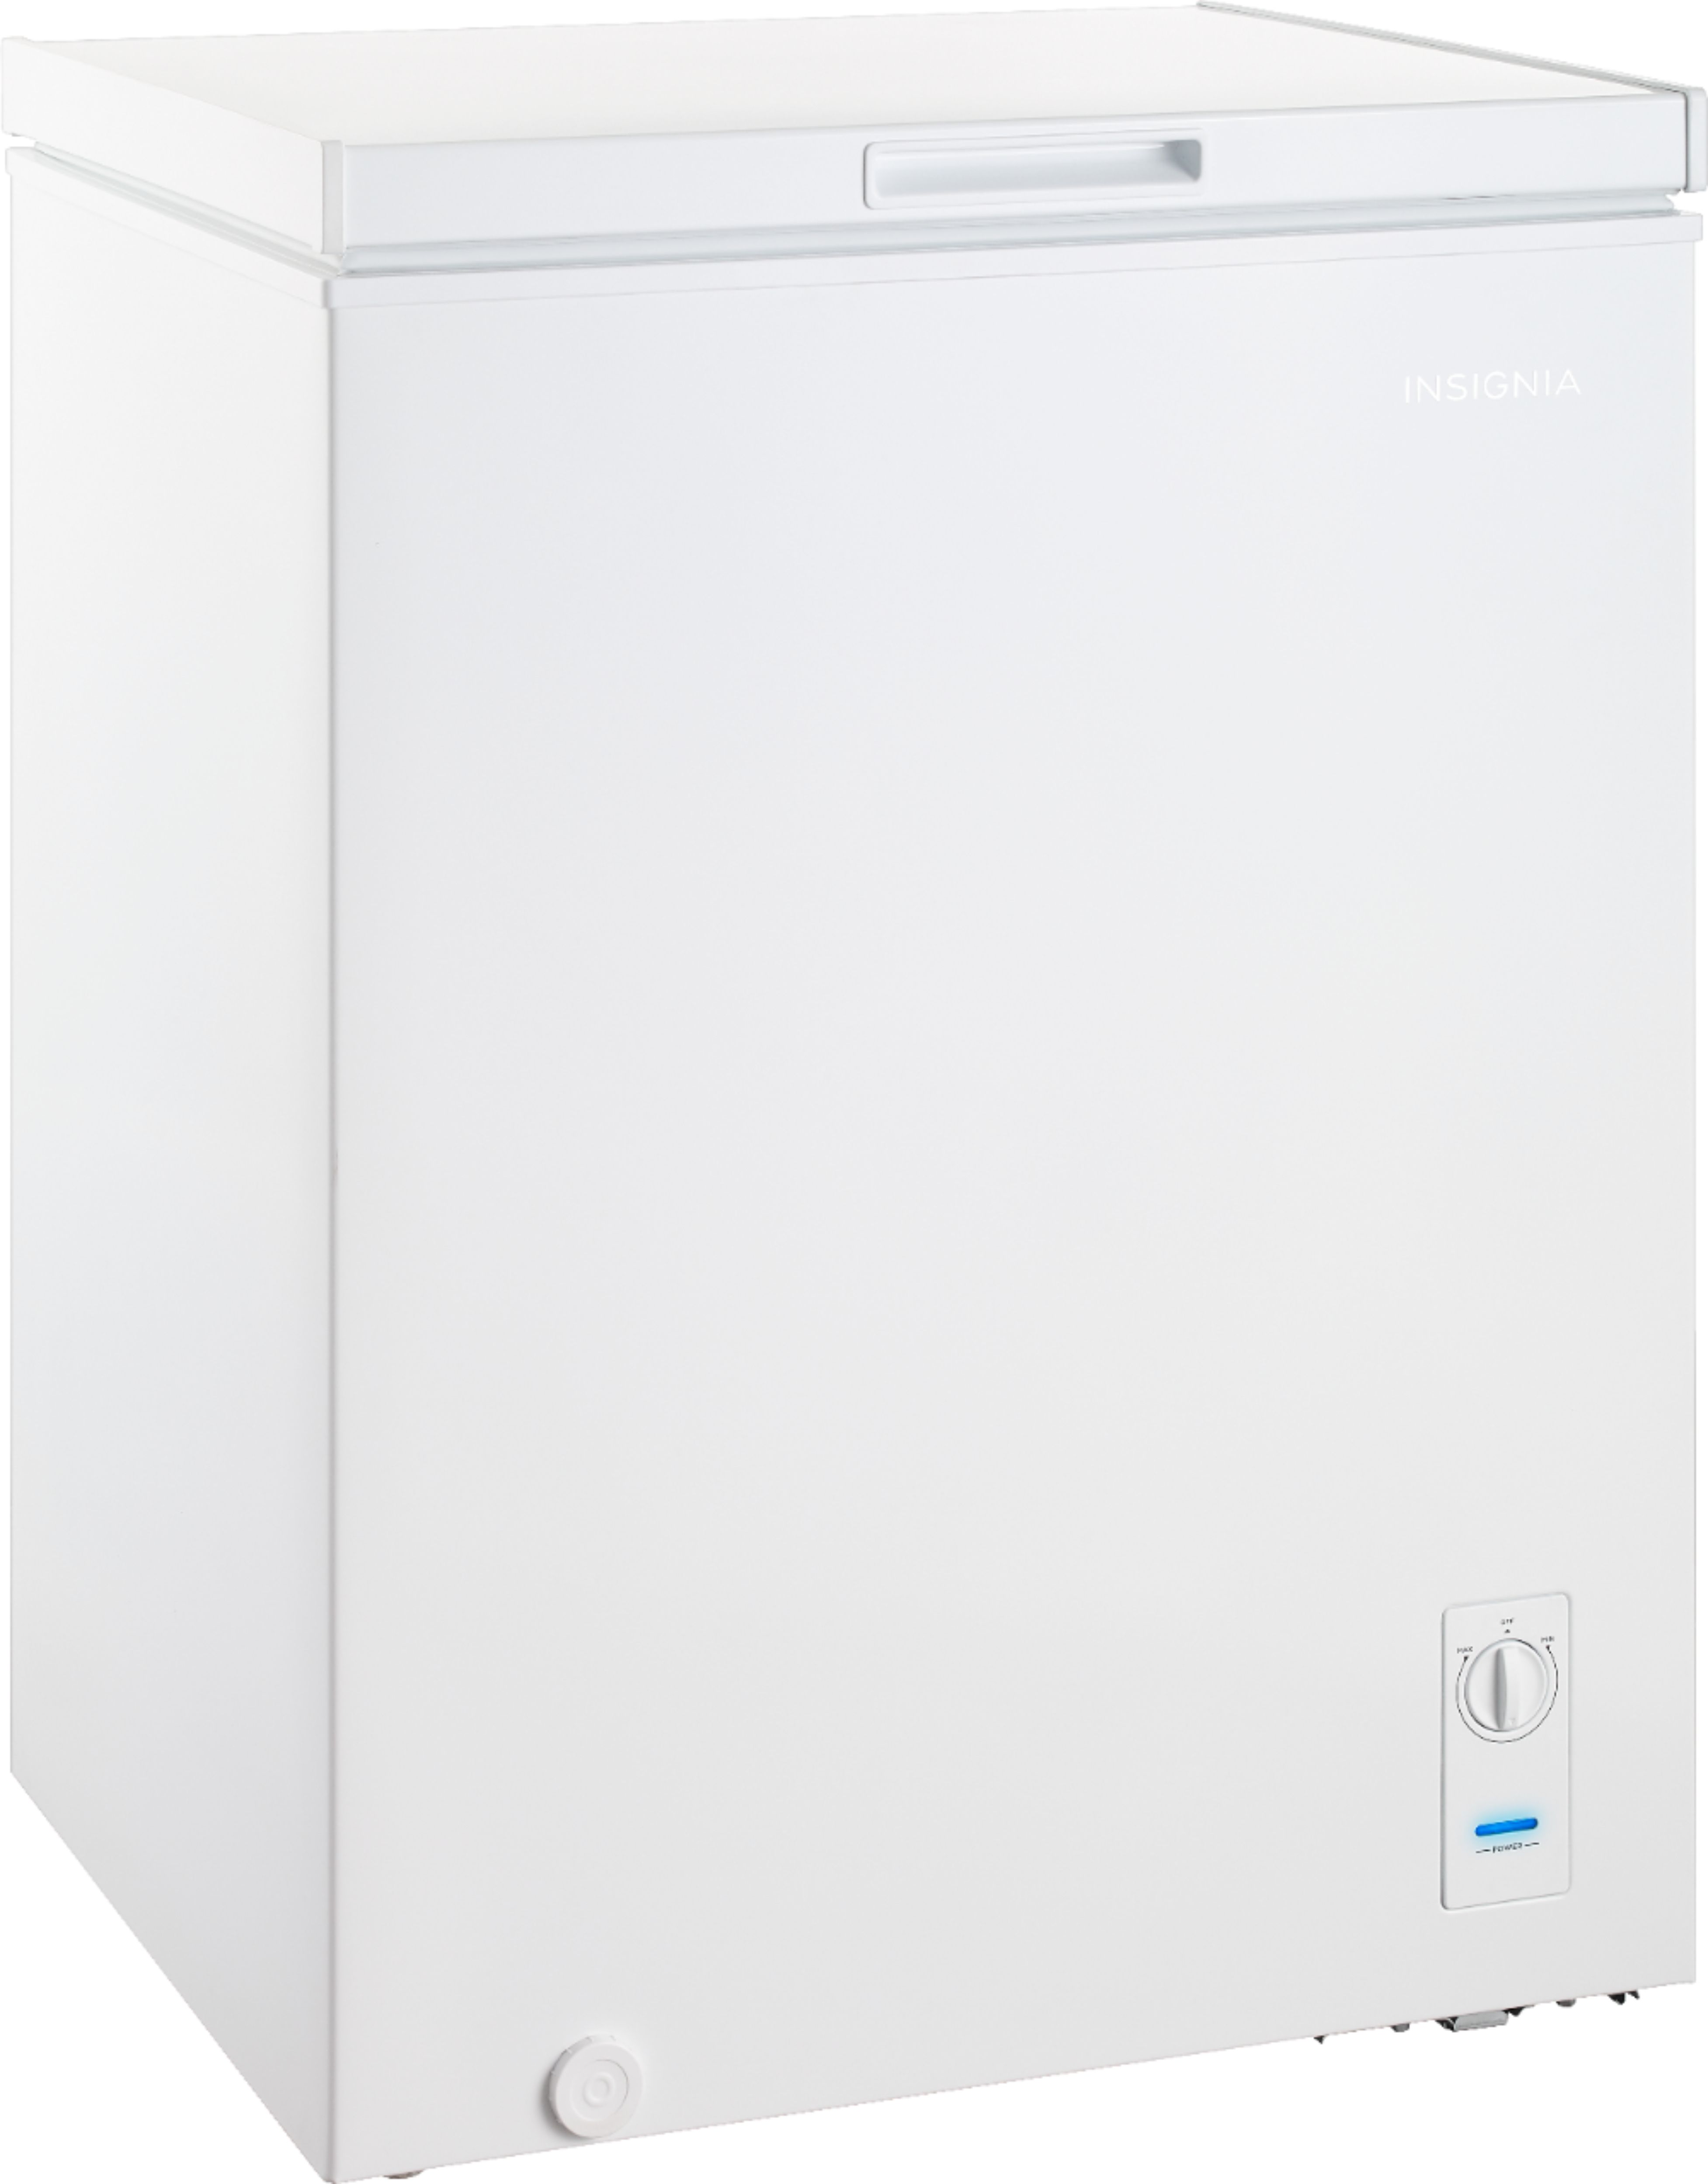 Insignia™ 5.0 Cu. Ft. Chest Freezer White NS-CZ50WH0 - Best Buy